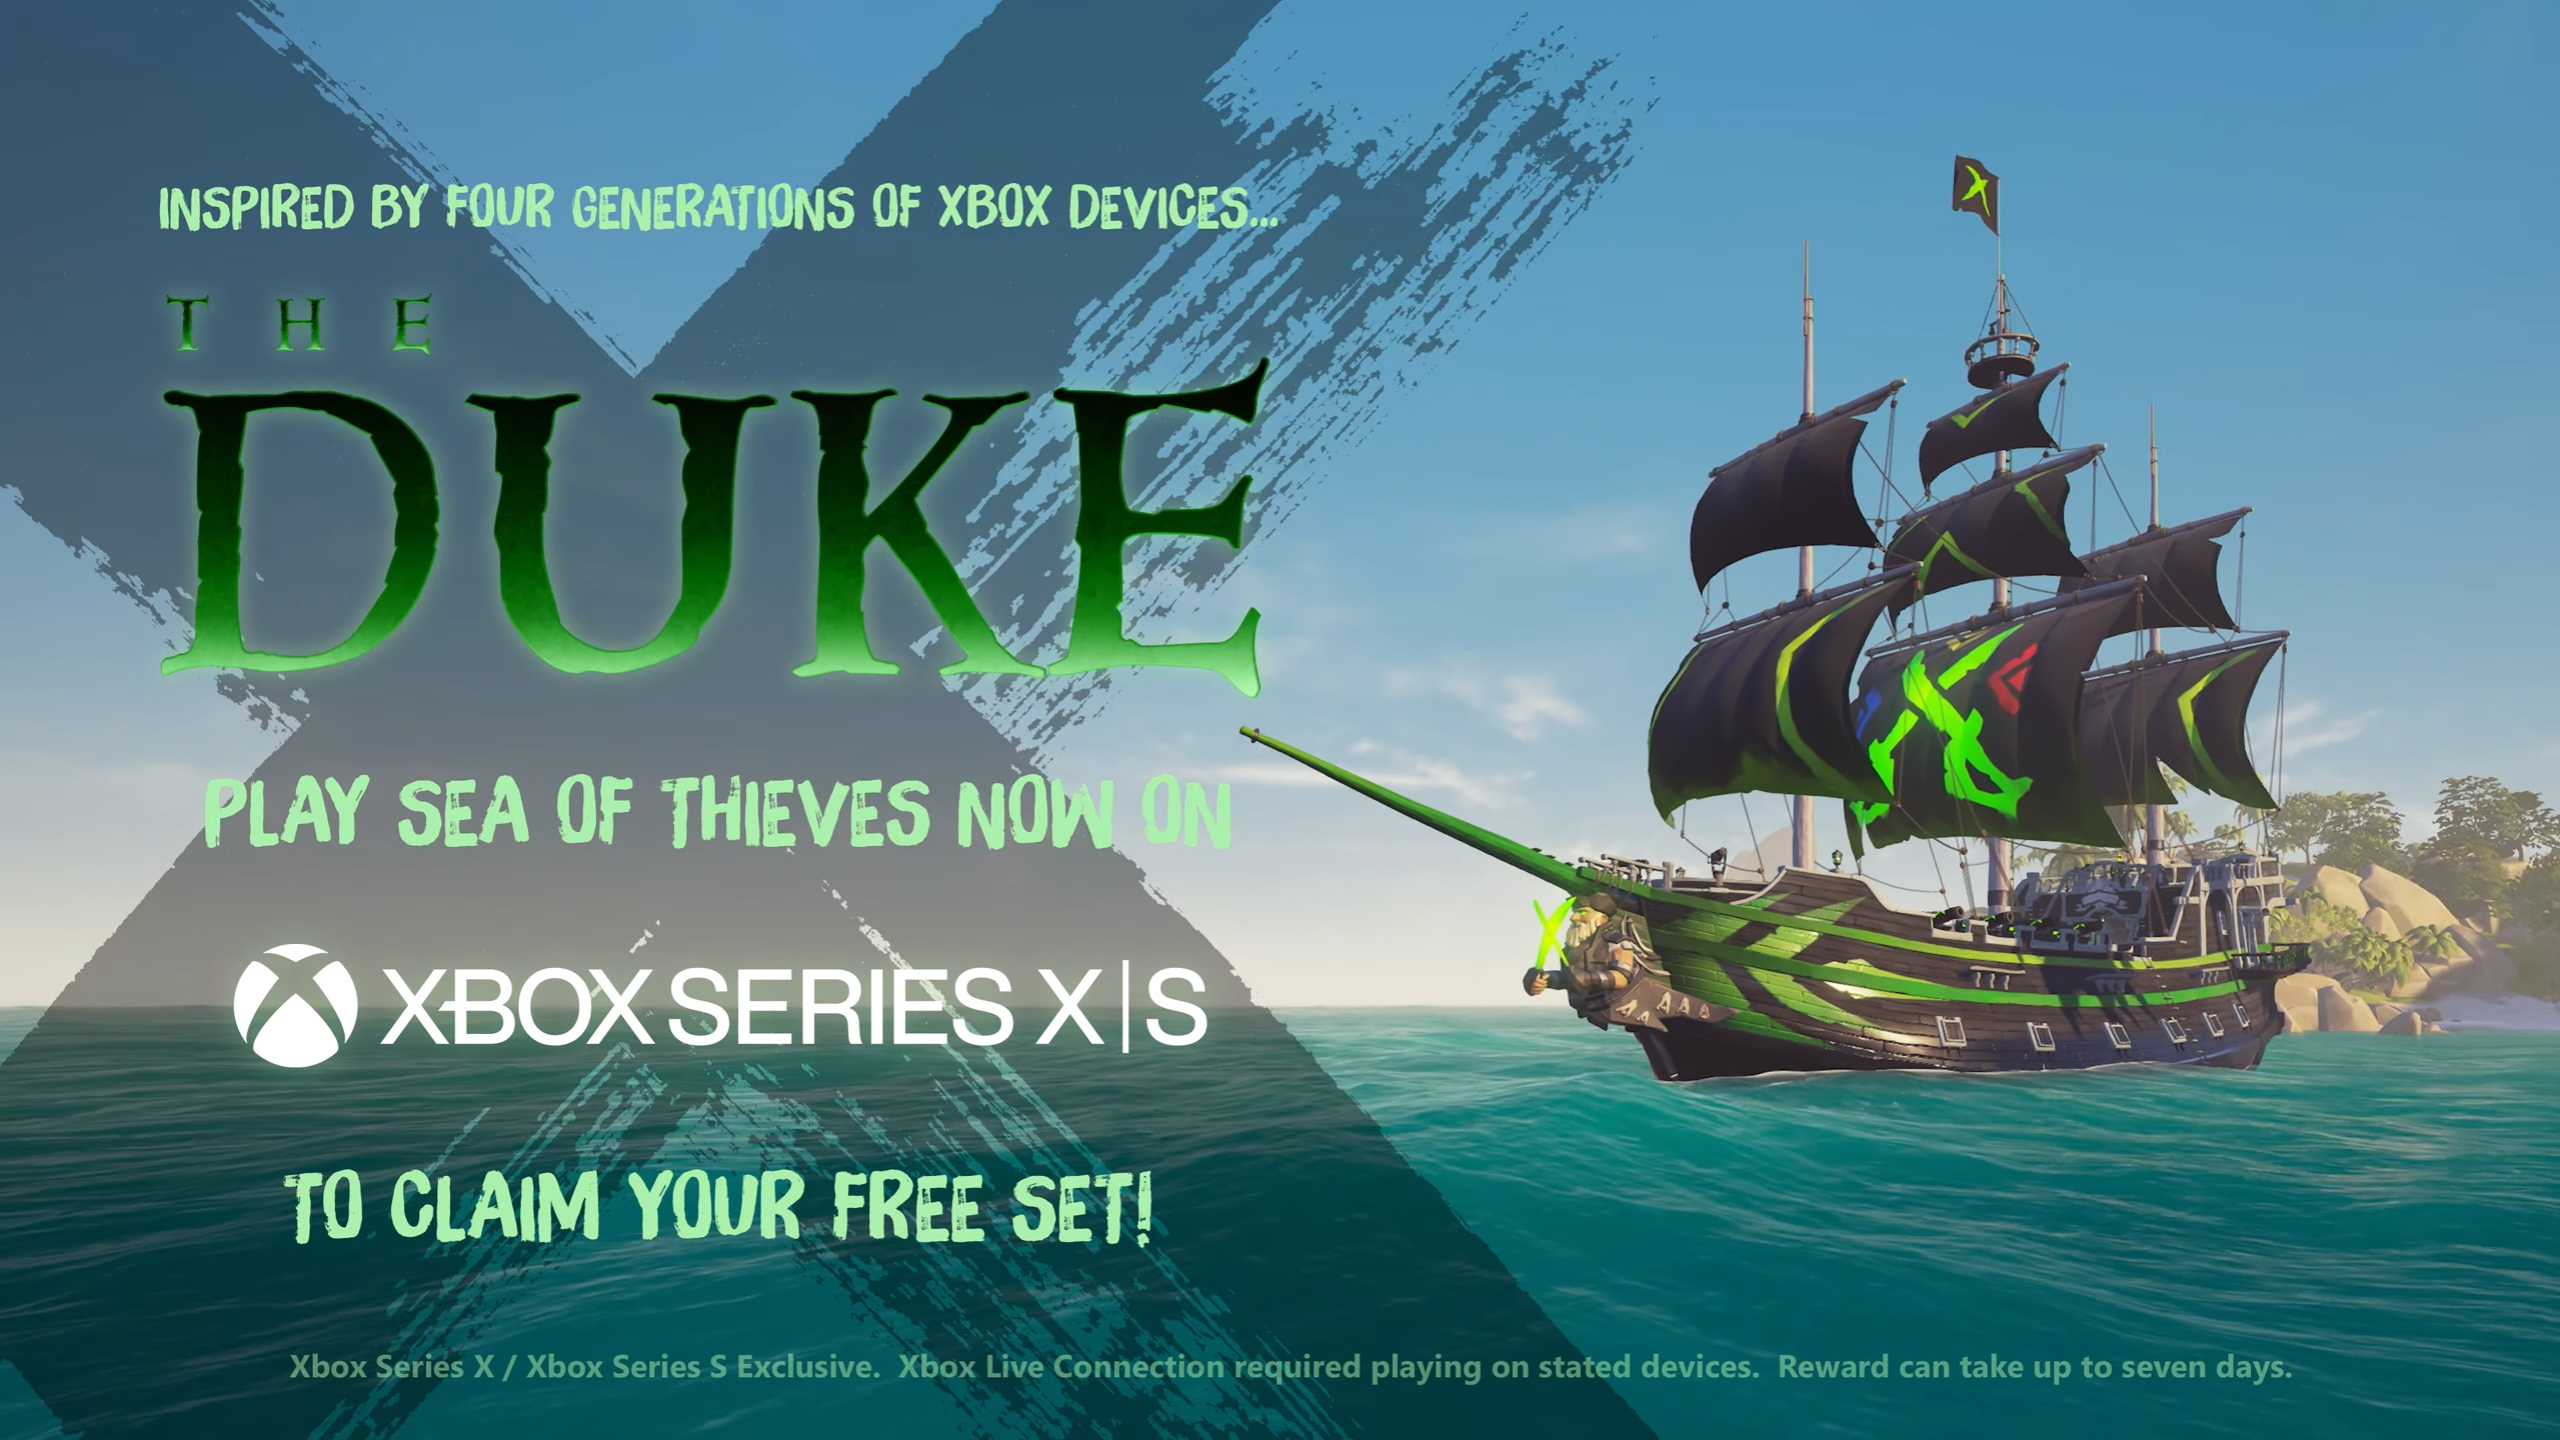 Sea of thieves донат. Сет Дюка Sea of Thieves. Корабль Дюка Sea of Thieves. Сет Xbox Sea of Thieves. Комплект Дюк Sea of Thieves.